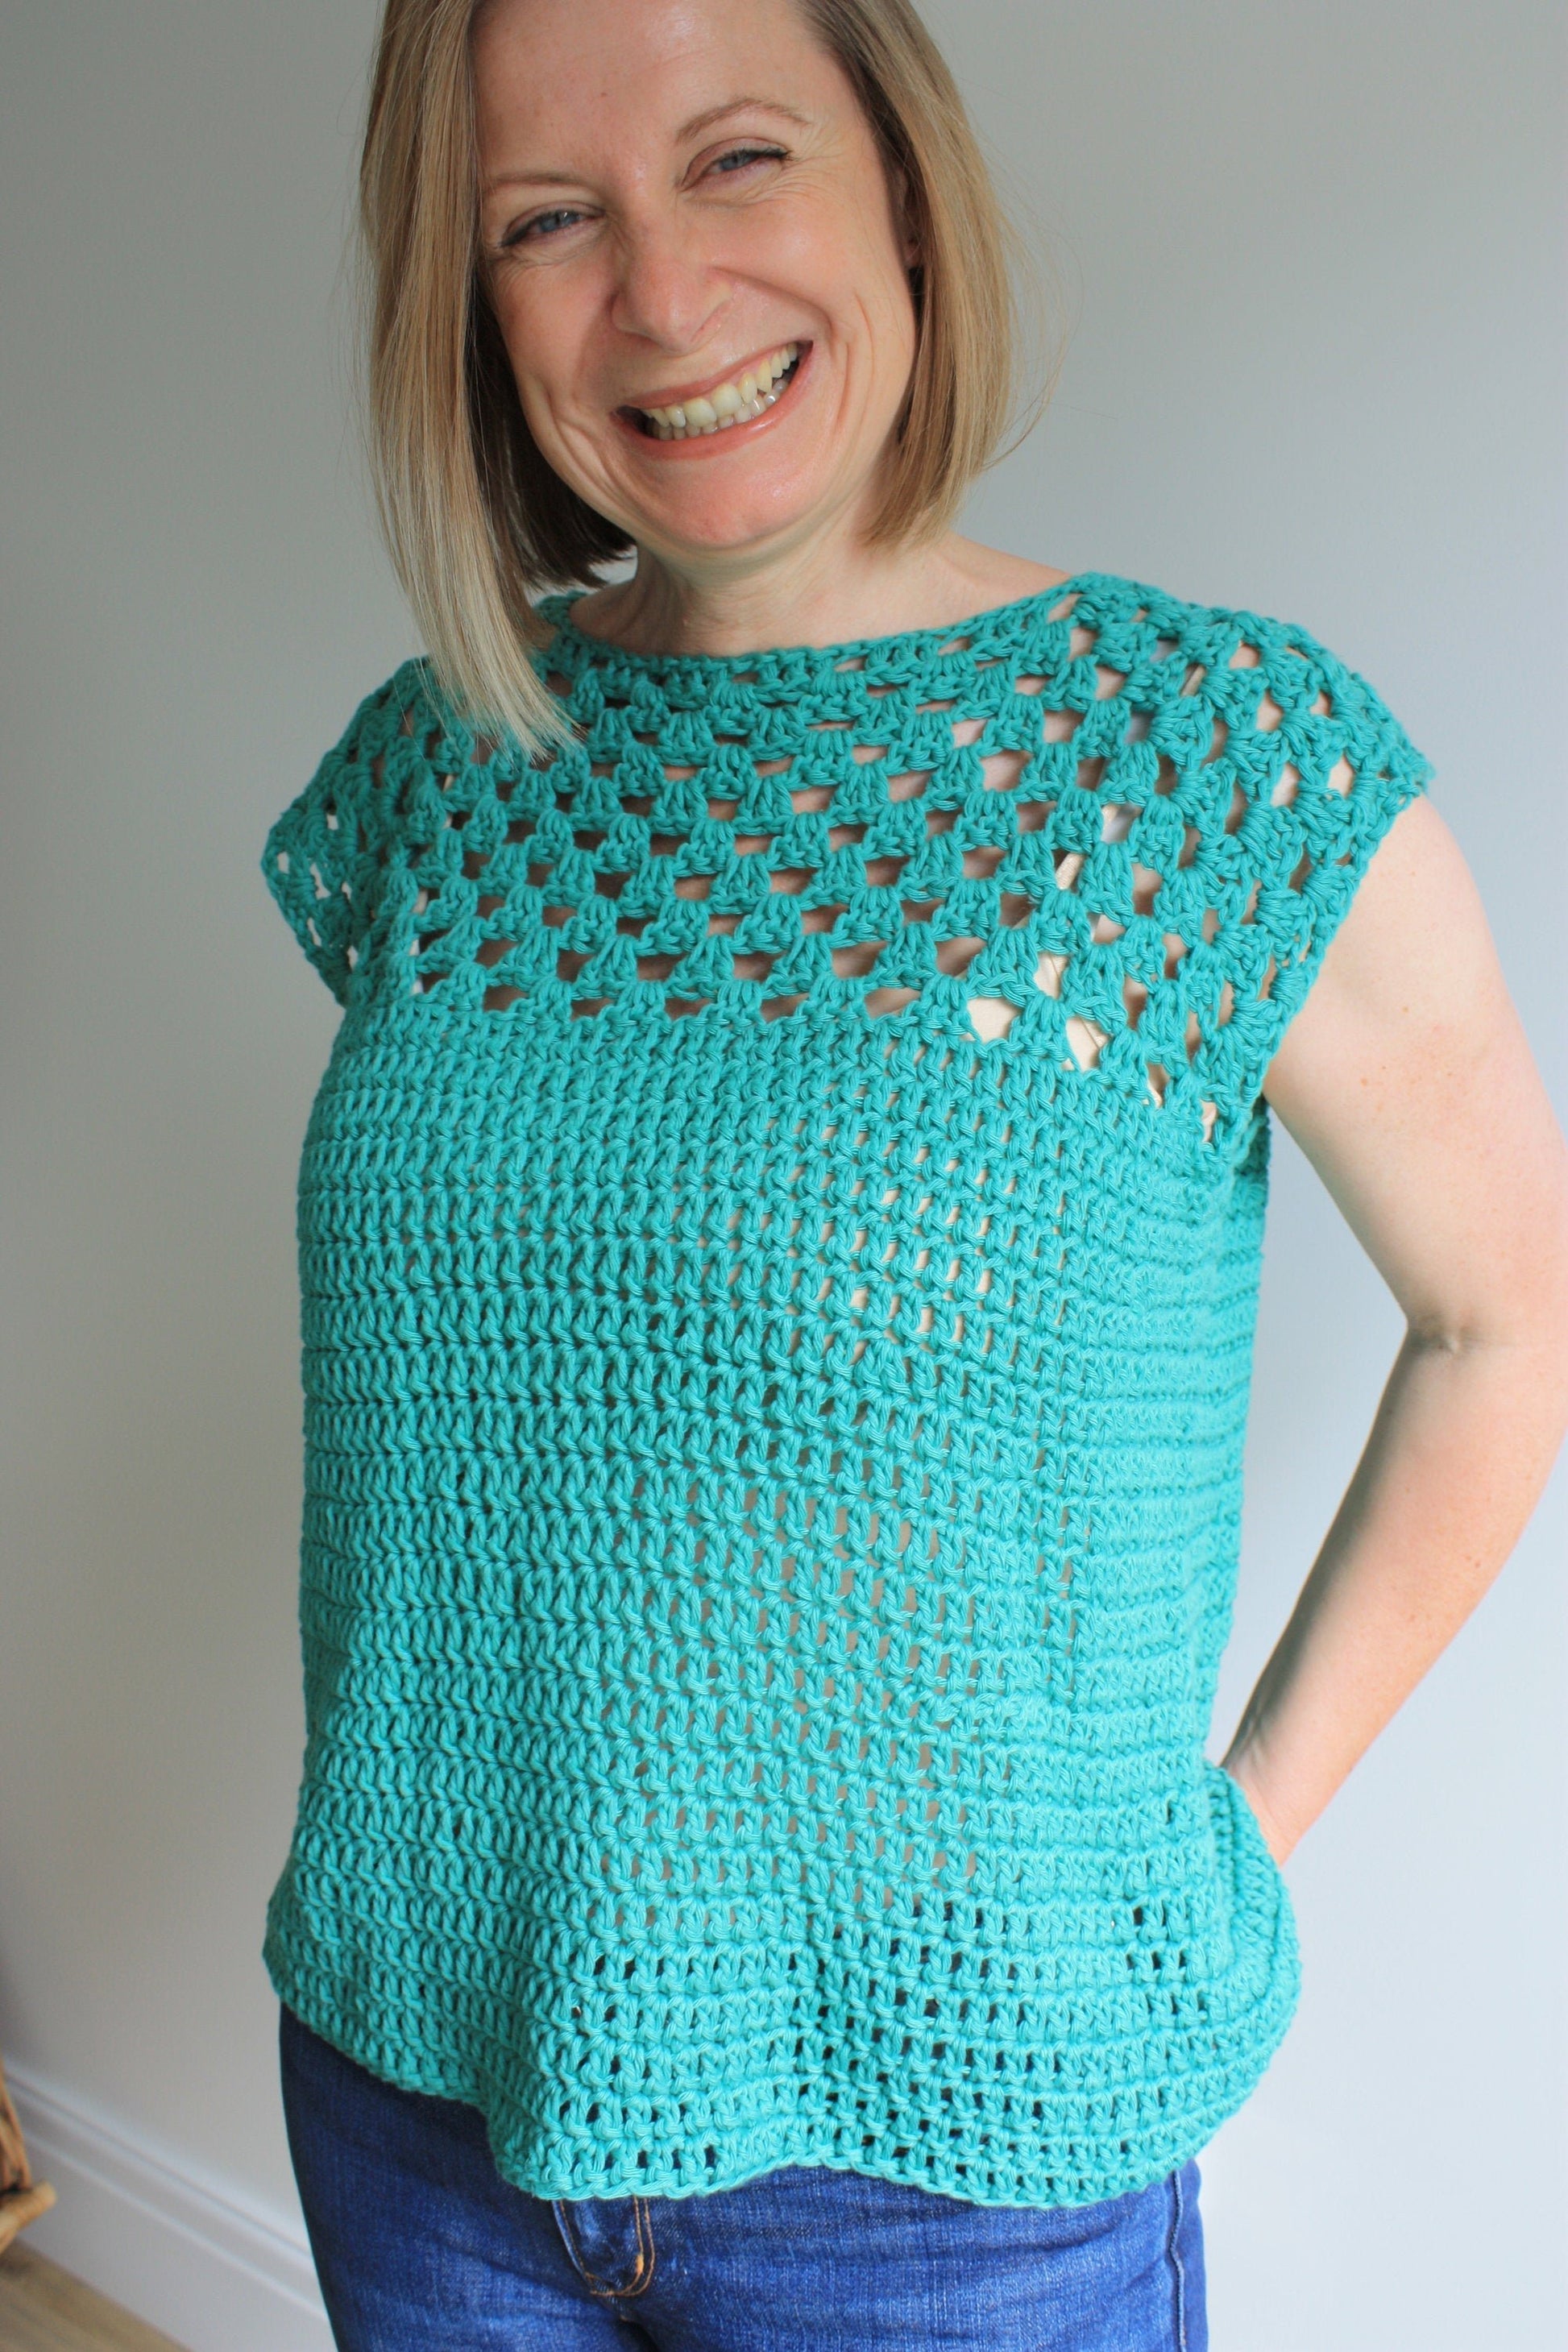 Easy Crochet Pattern - Easy Granny Square Sleeveless Tunic | Simply Squares Top - King & Eye